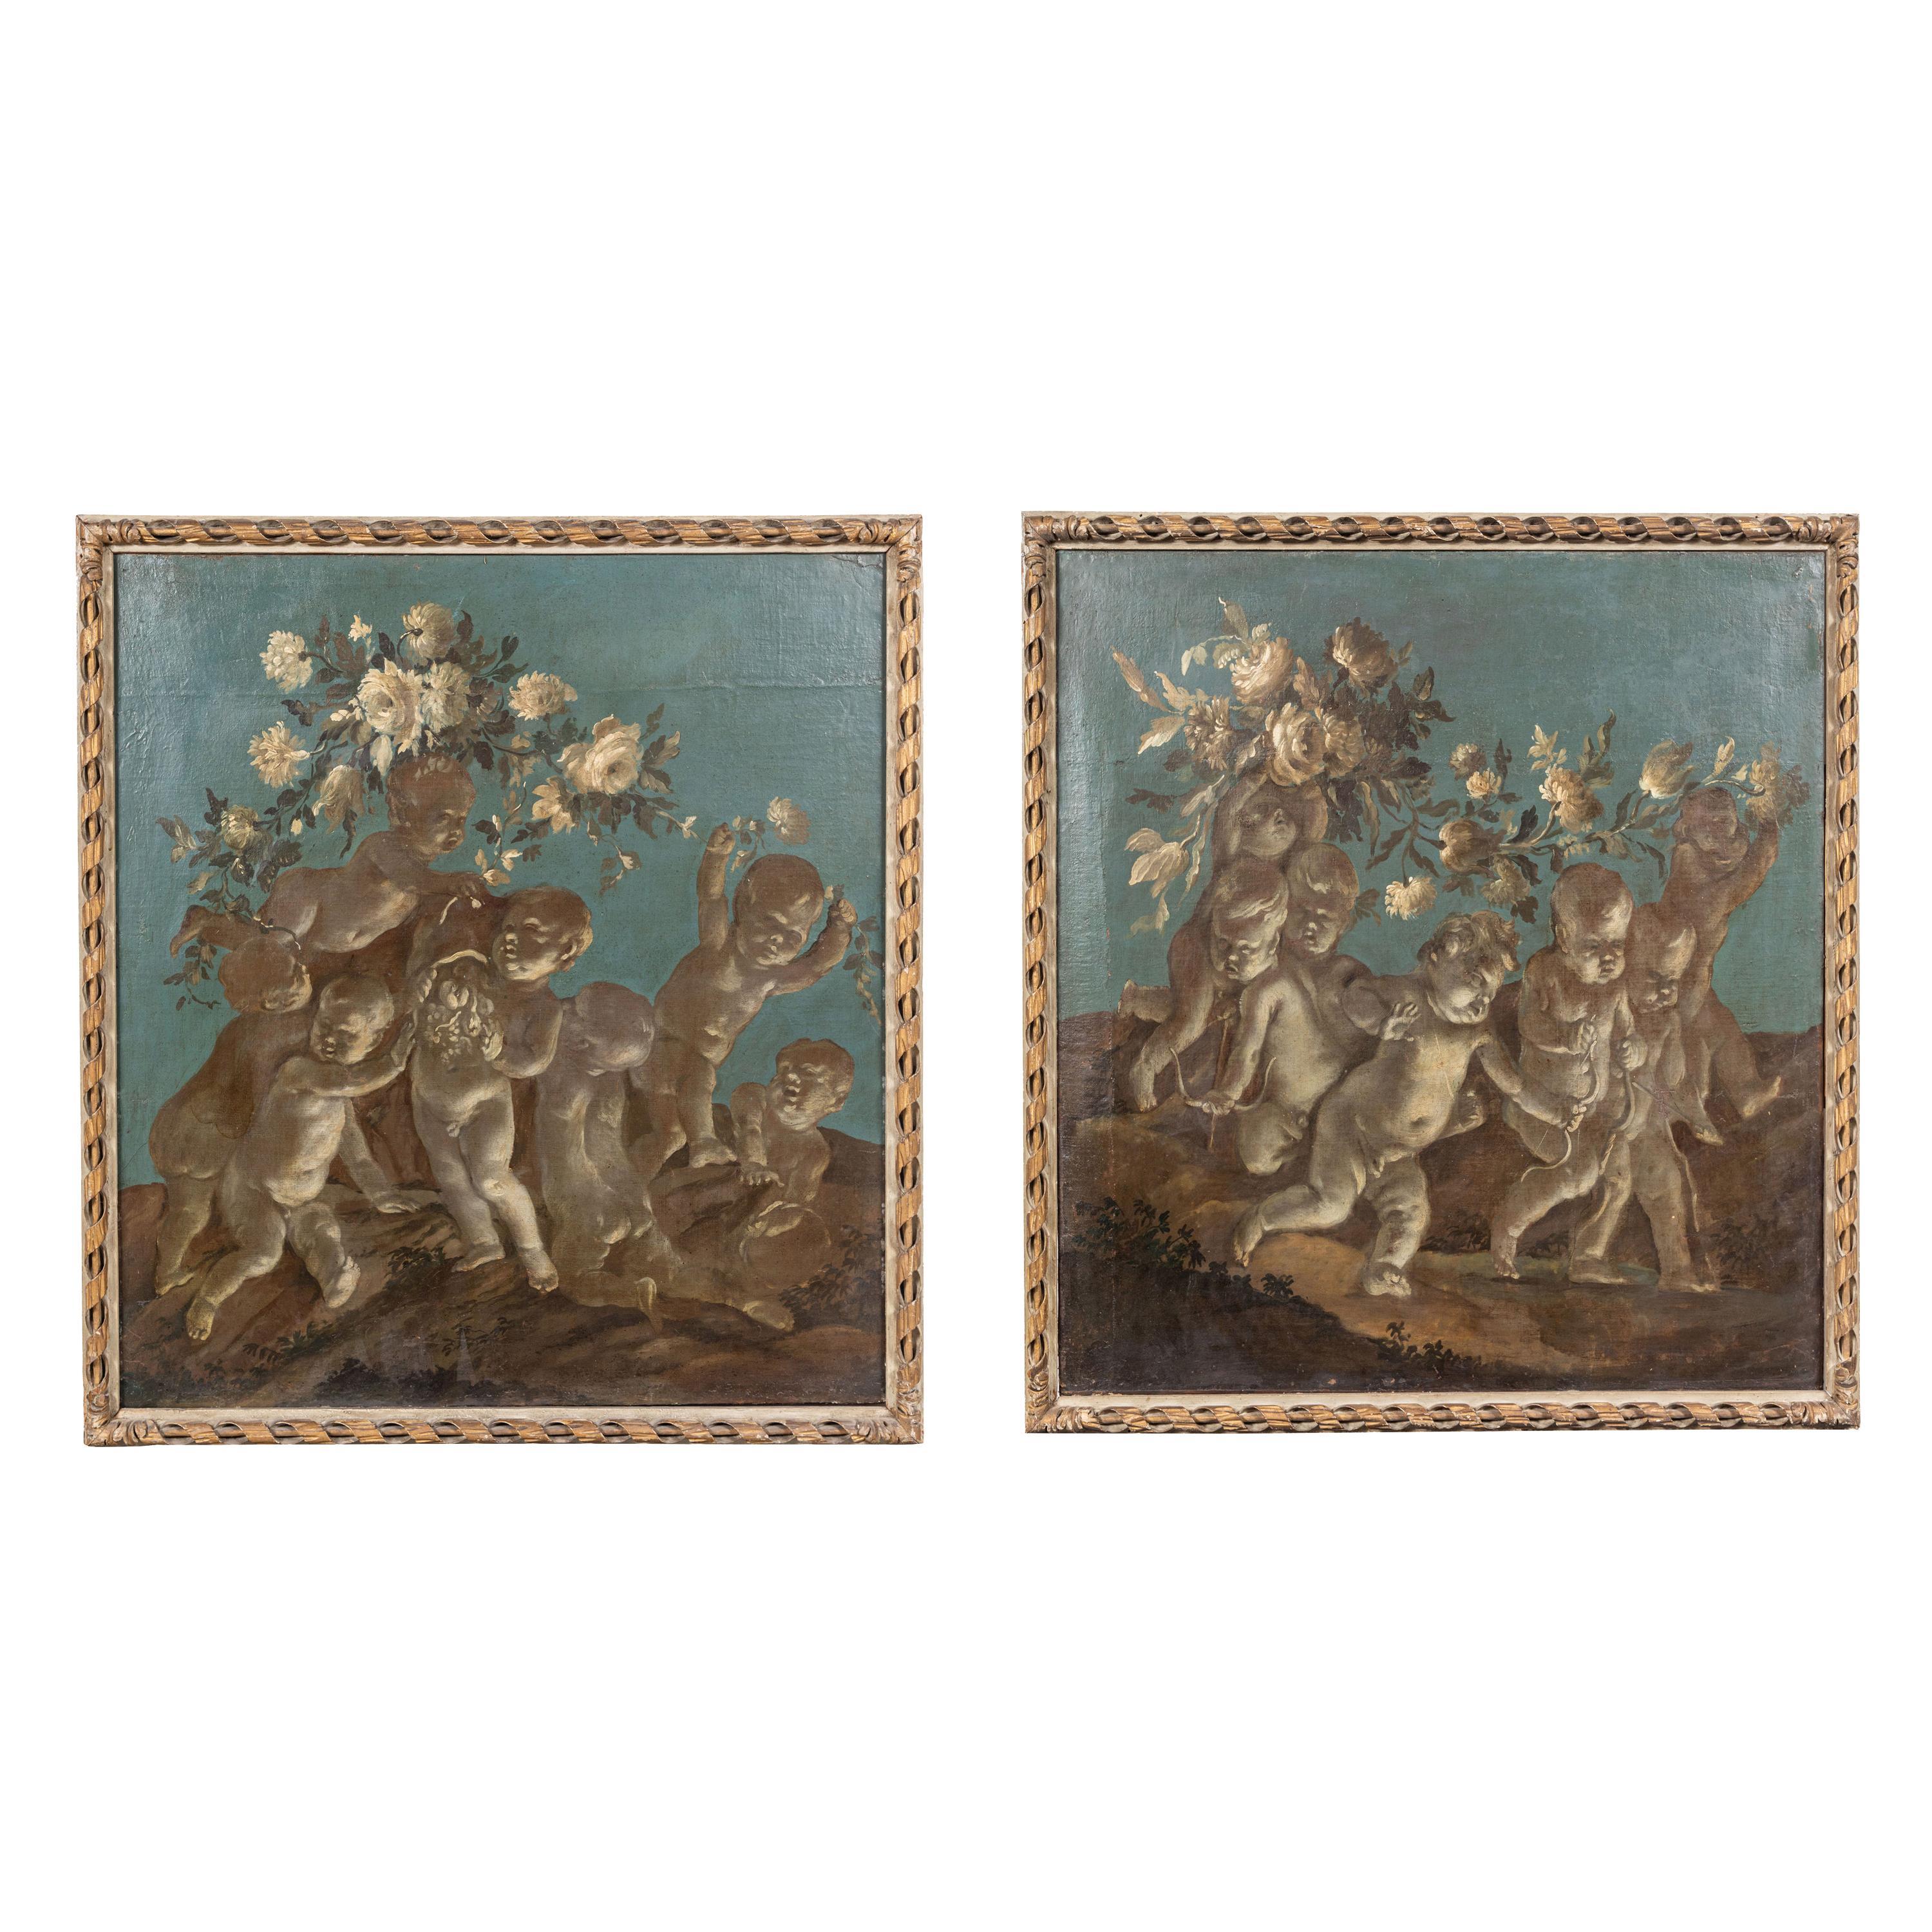 A chic pair of Roman, oil-on-canvas overdoor paintings done in a nocturne, grisaille style. Each featuring underlit cherubs at play amongst streaming garlands of blooming flowers, all against a rich, indigo sky.

Note: The pair have slightly